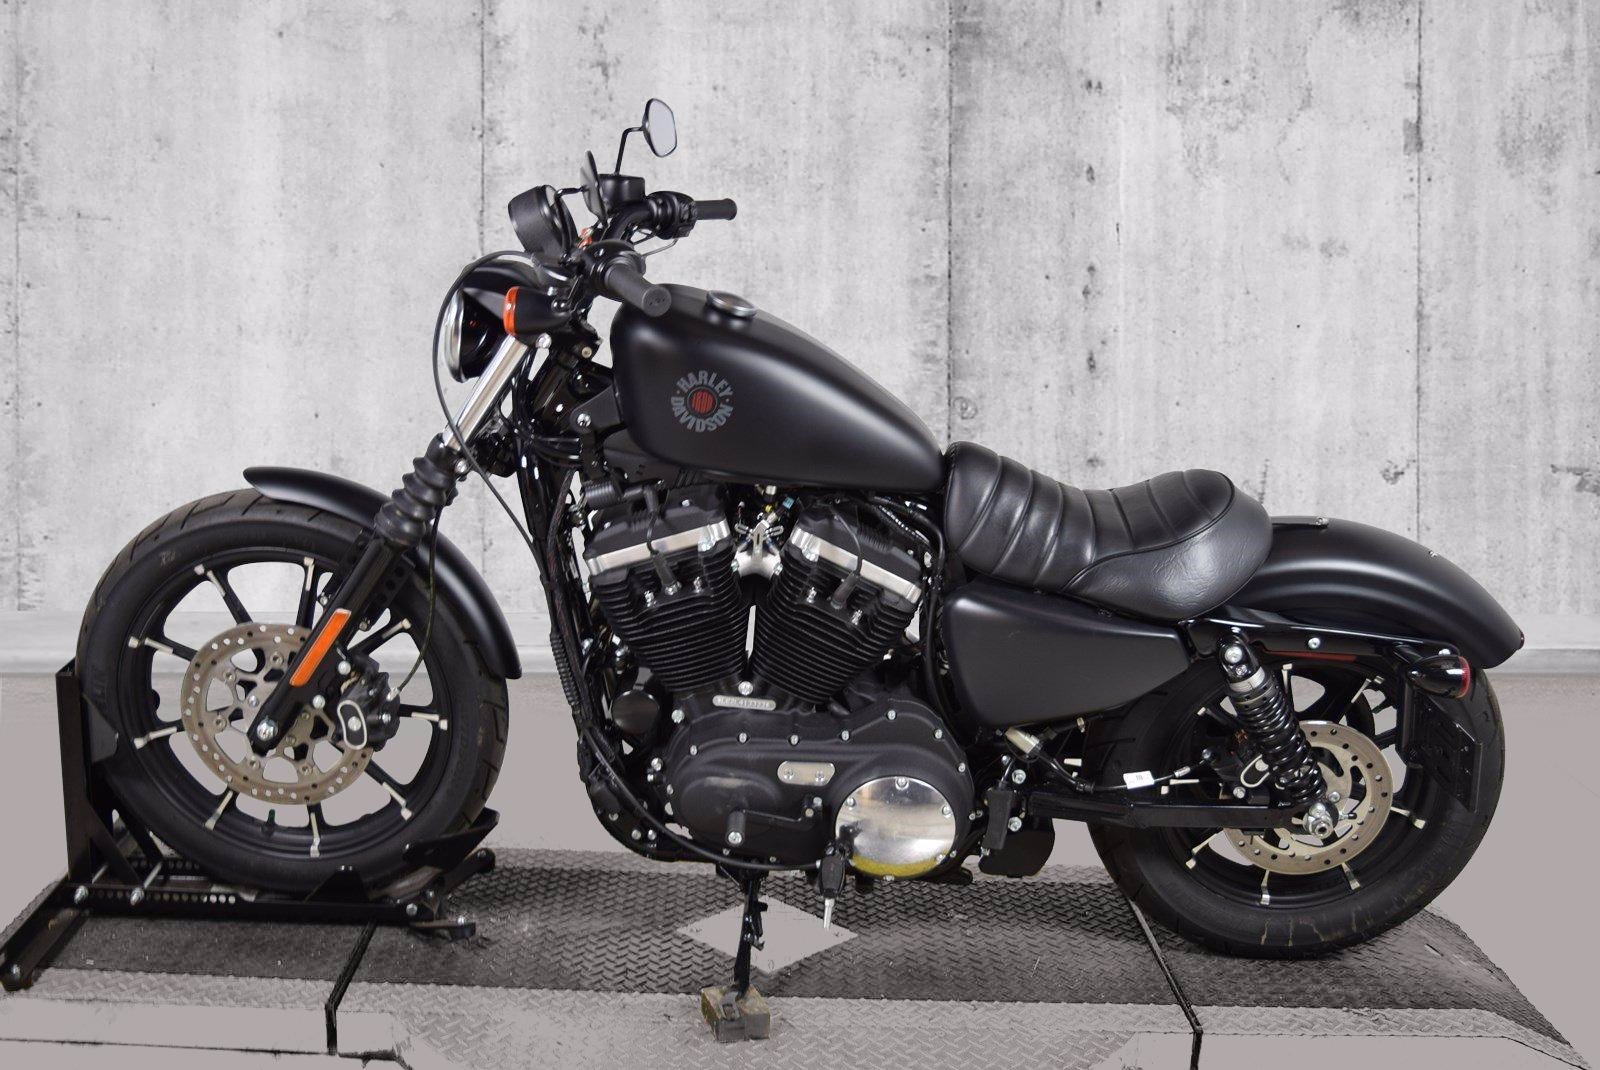 Pre-Owned 2020 Harley-Davidson Sportster Iron 883 XL883N Sportster in